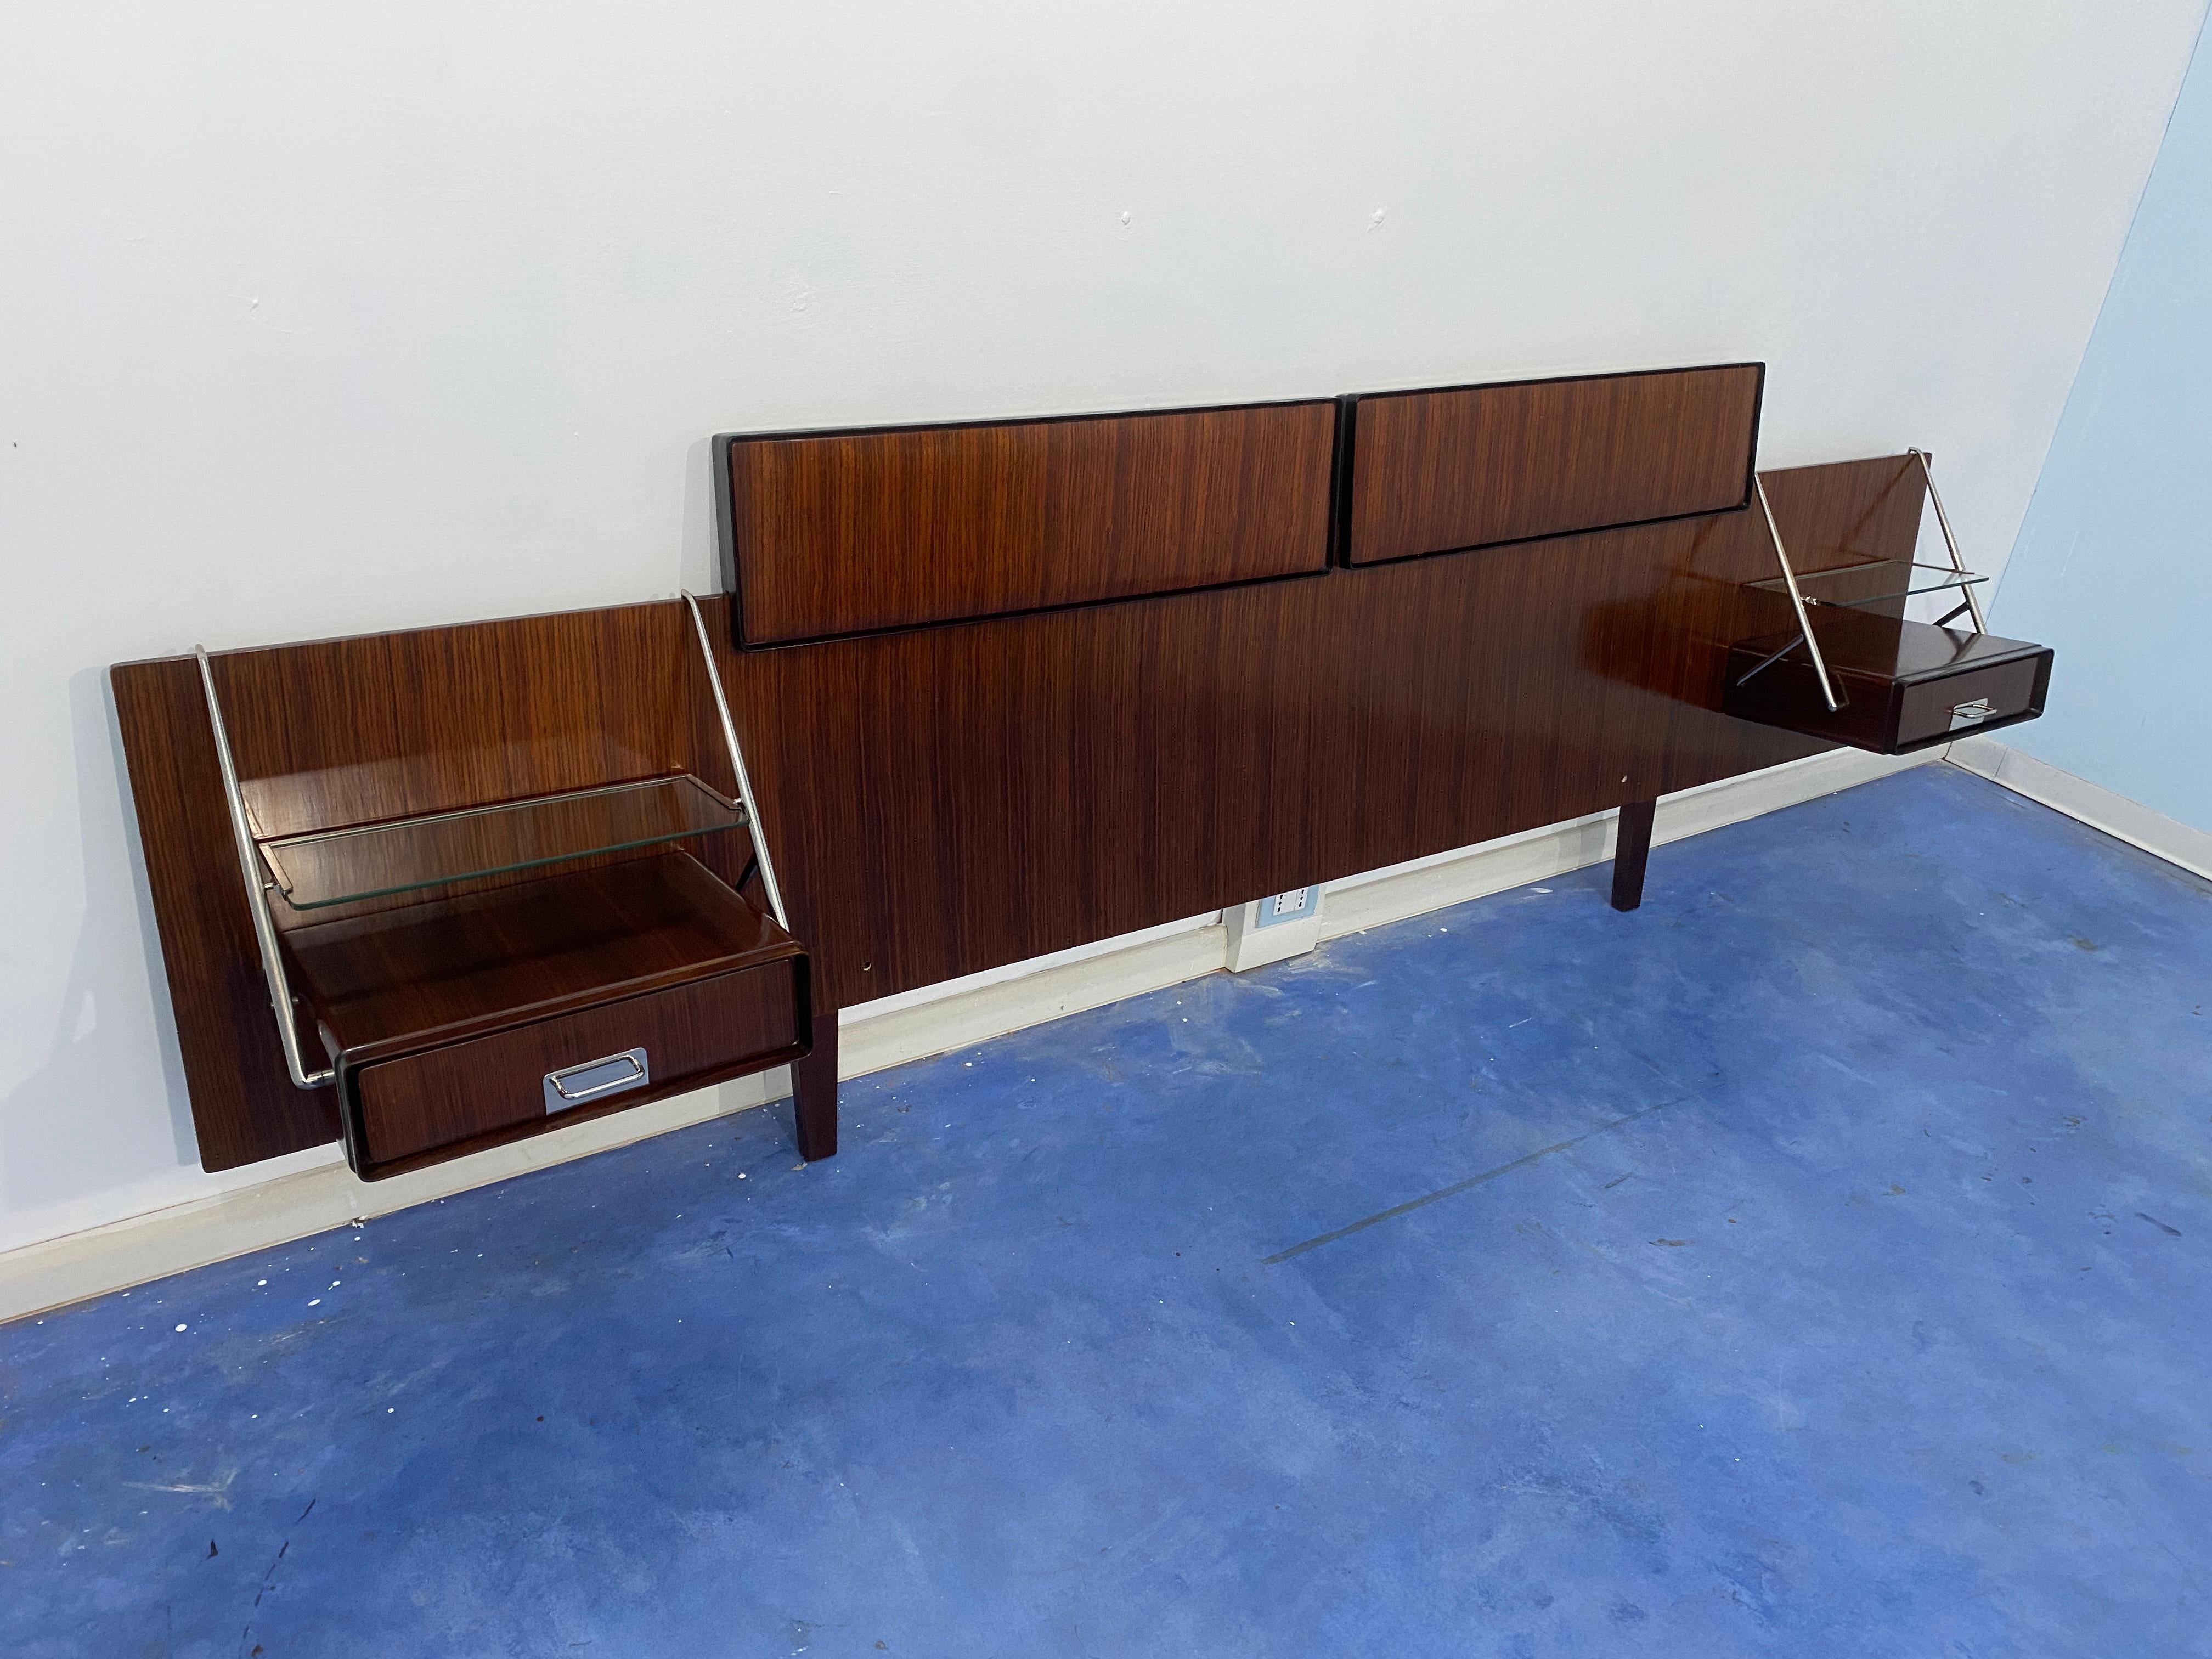 Mid-Century Modern Italian nightstands from the 1950s with headboard bed designed by Silvio Cavatorta